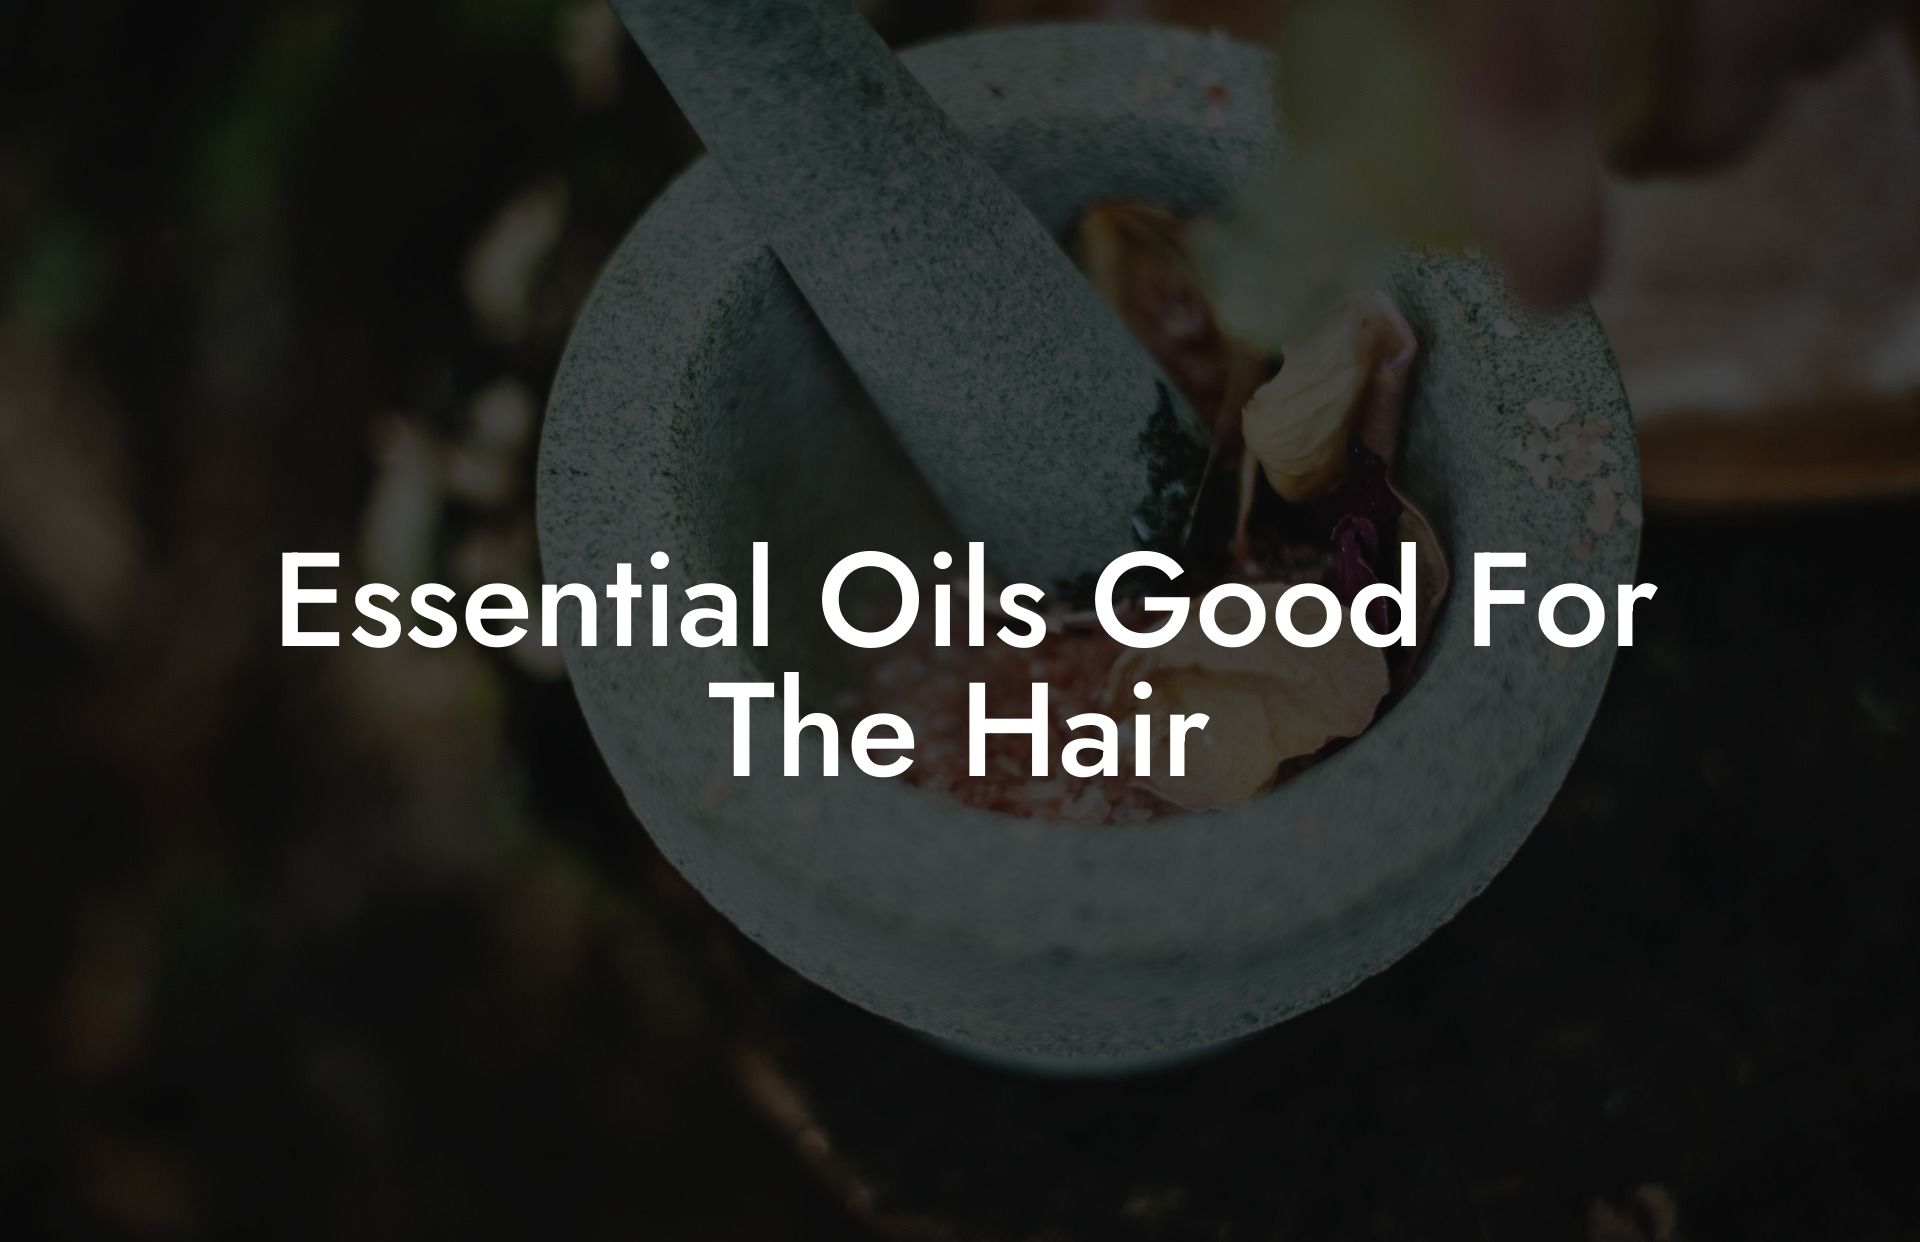 Essential Oils Good For The Hair